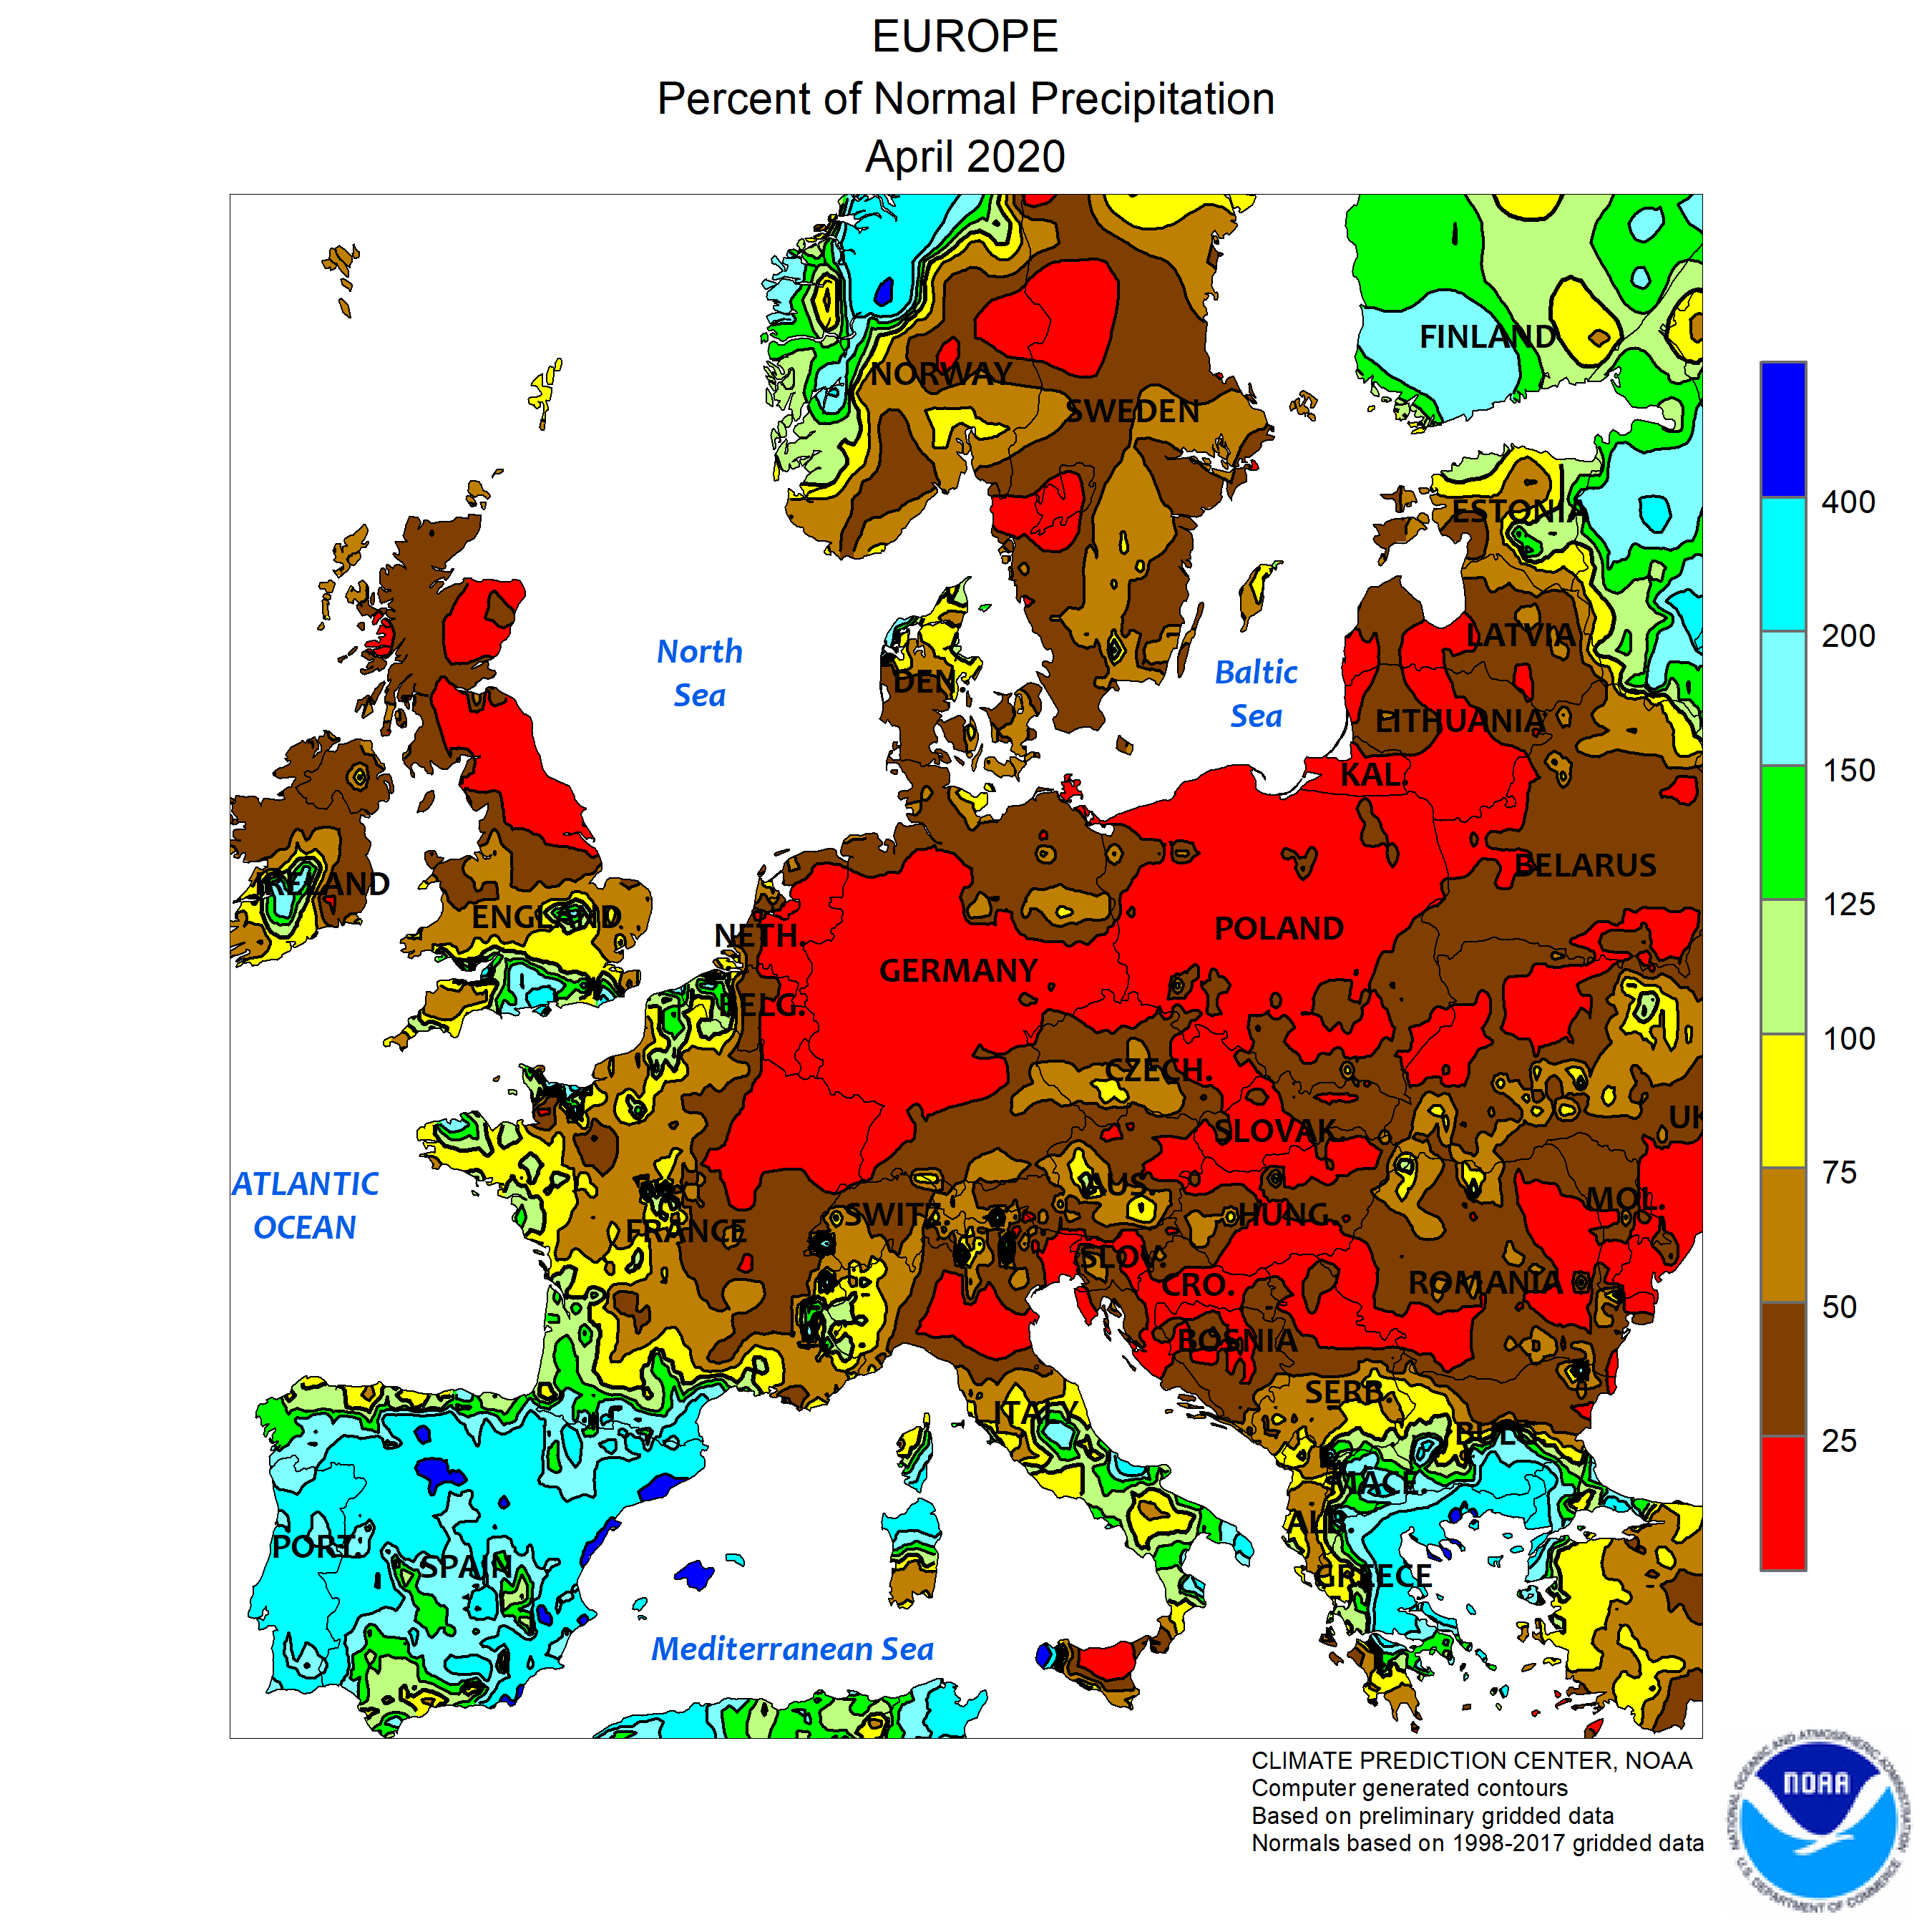 File 04 Cpc Europe Percent Of Normal Precipitation Png Wikimedia Commons